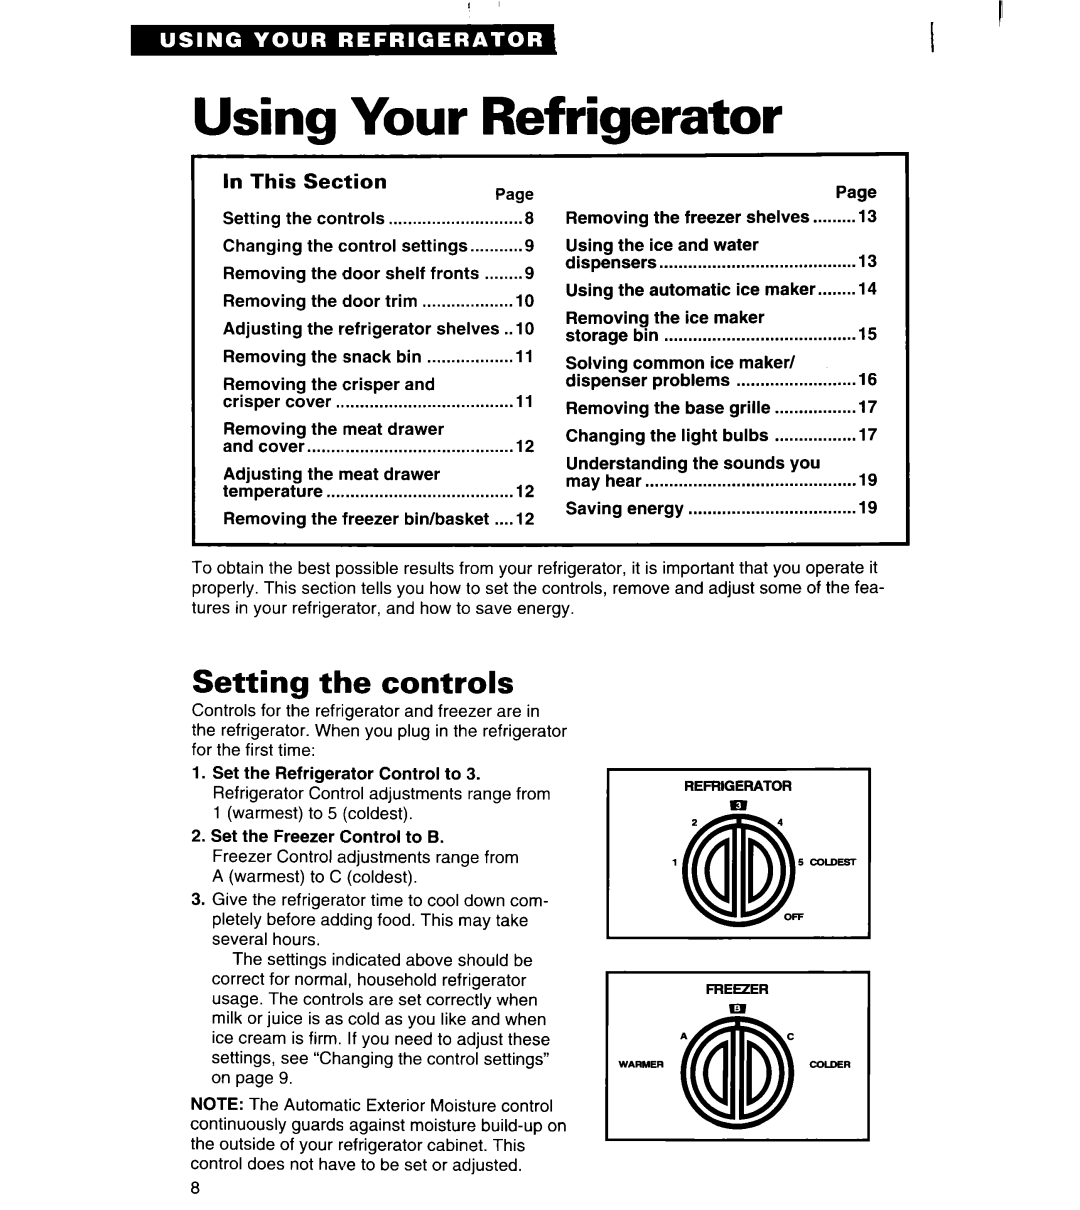 Whirlpool RS20AK, RS25AW, RS22BR, RS22AW, RS20DK Using Your Refrigerator, Setting the controls, In This, Section 